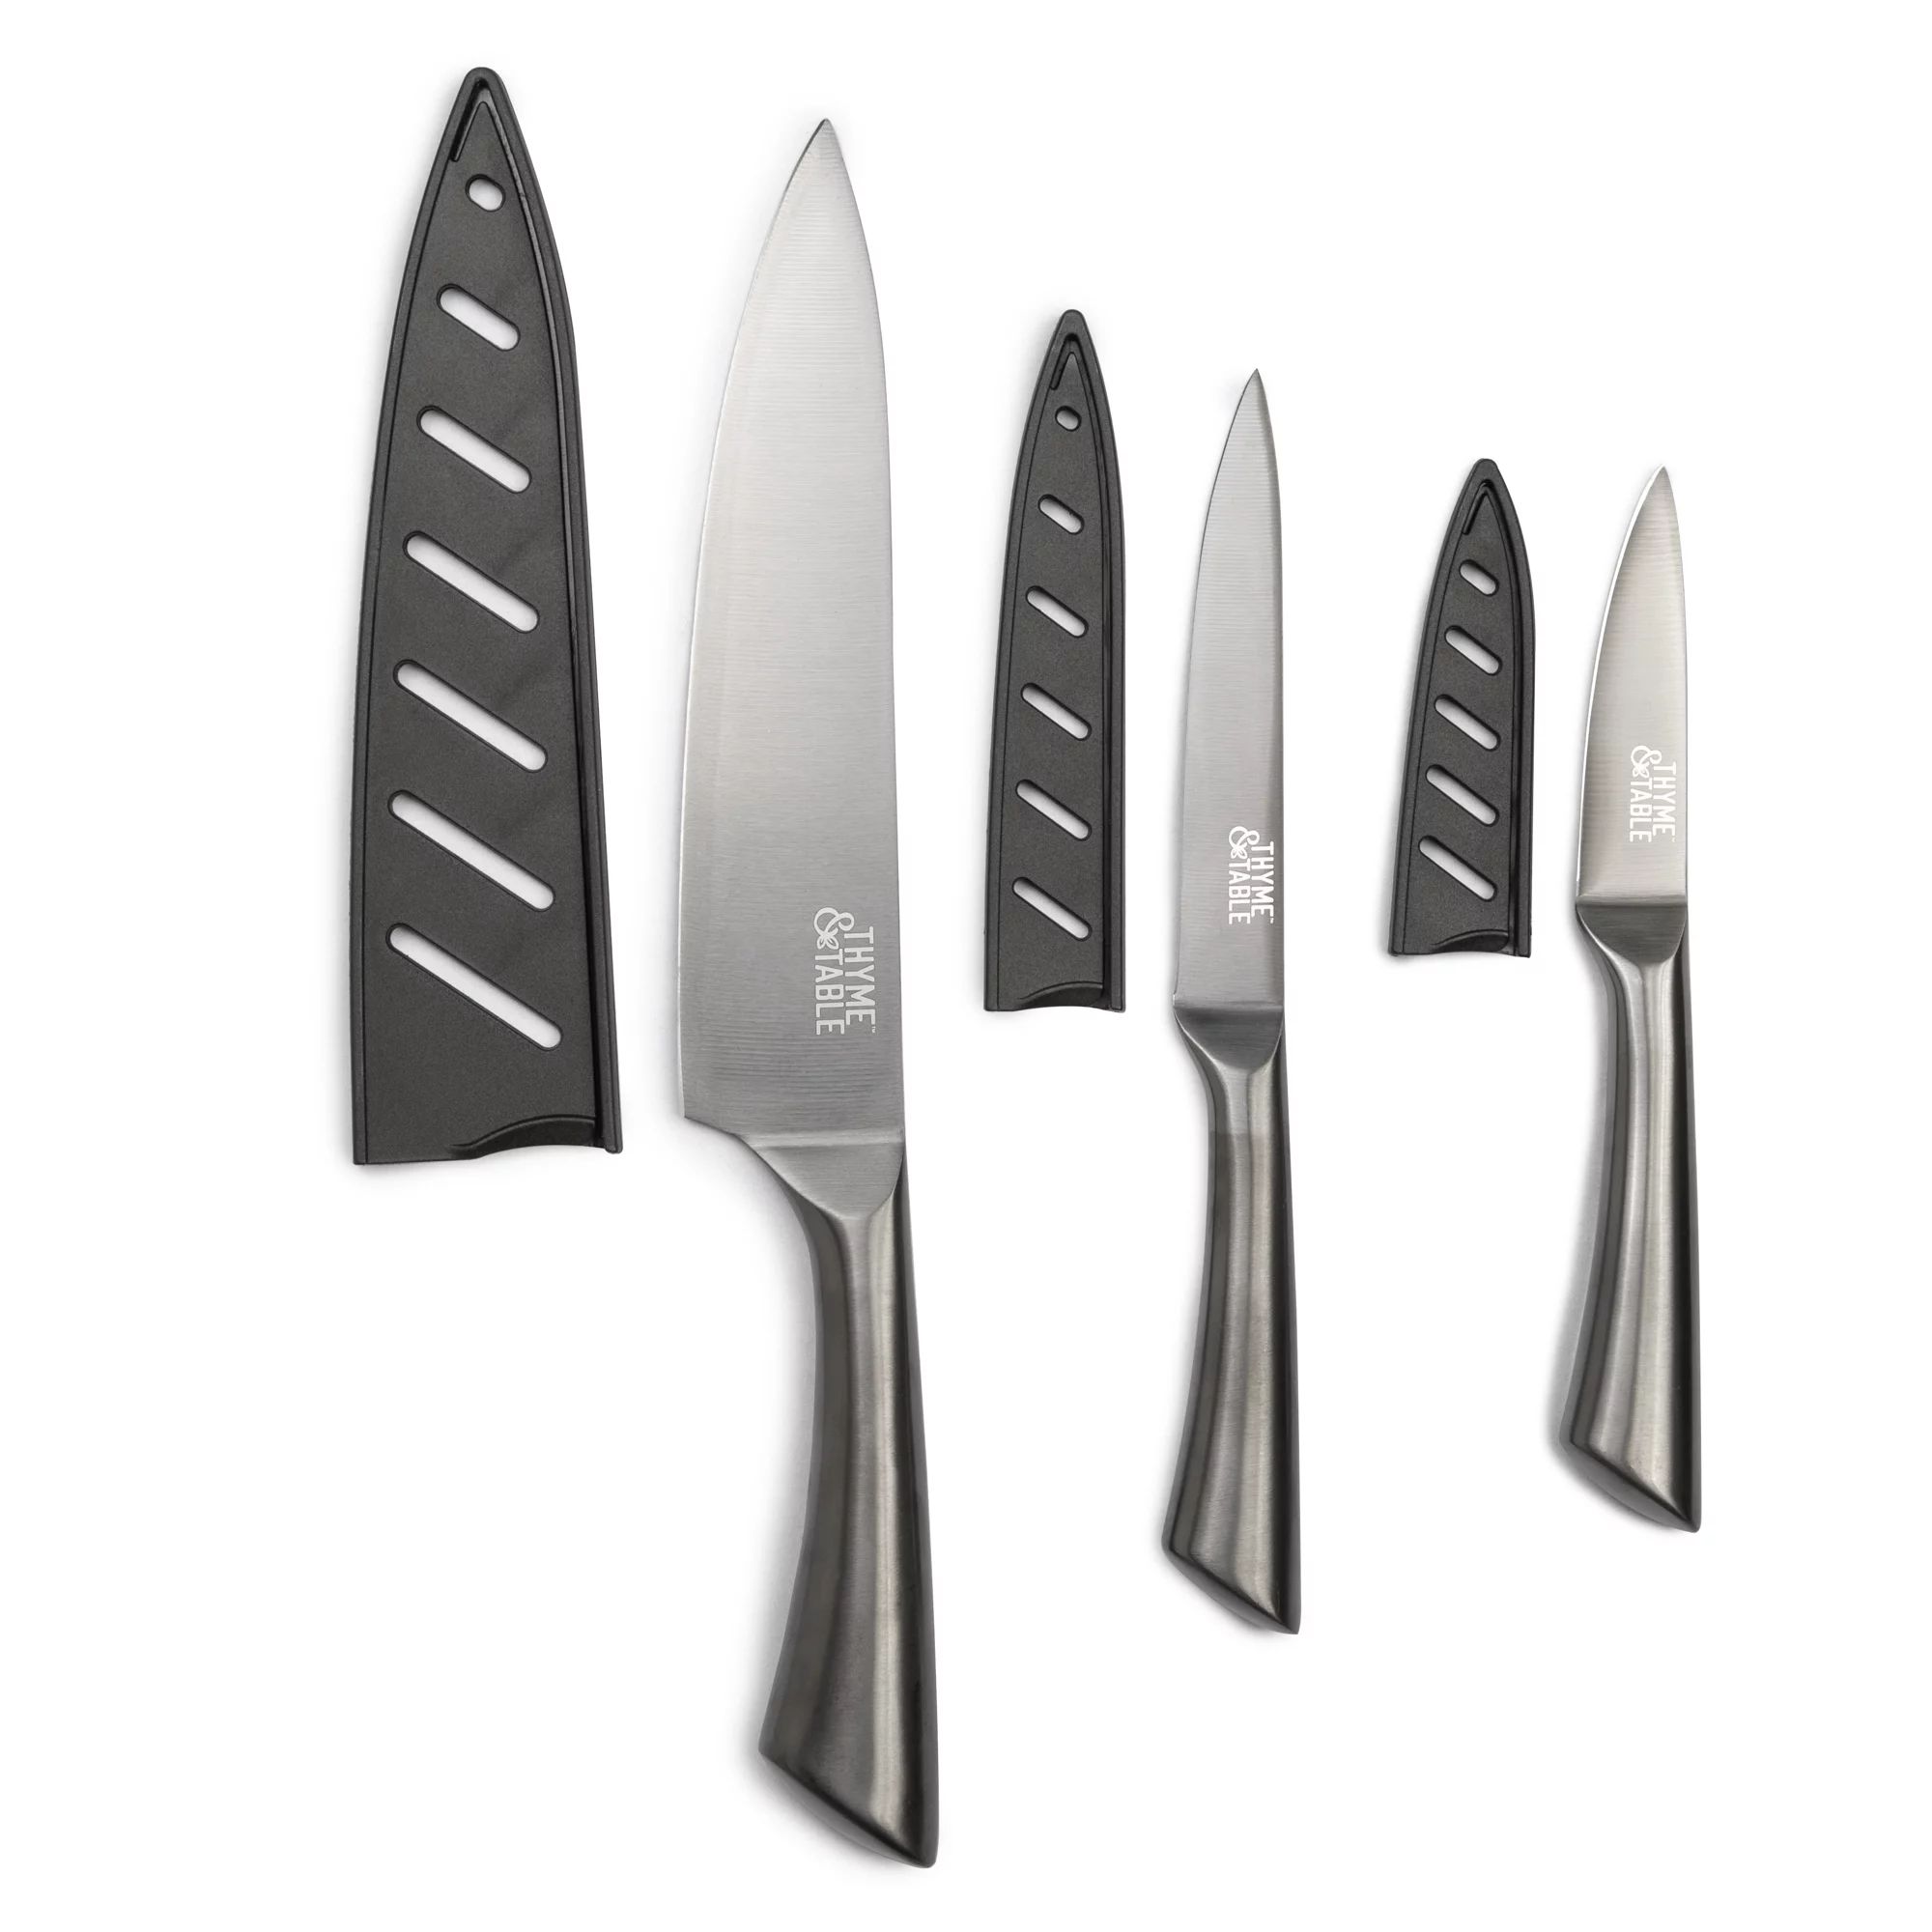 Thyme & Table Non-Stick Coated High Carbon Stainlless Steel Carbone Chef's Knives, 3 Piece Set - ... | Walmart (US)